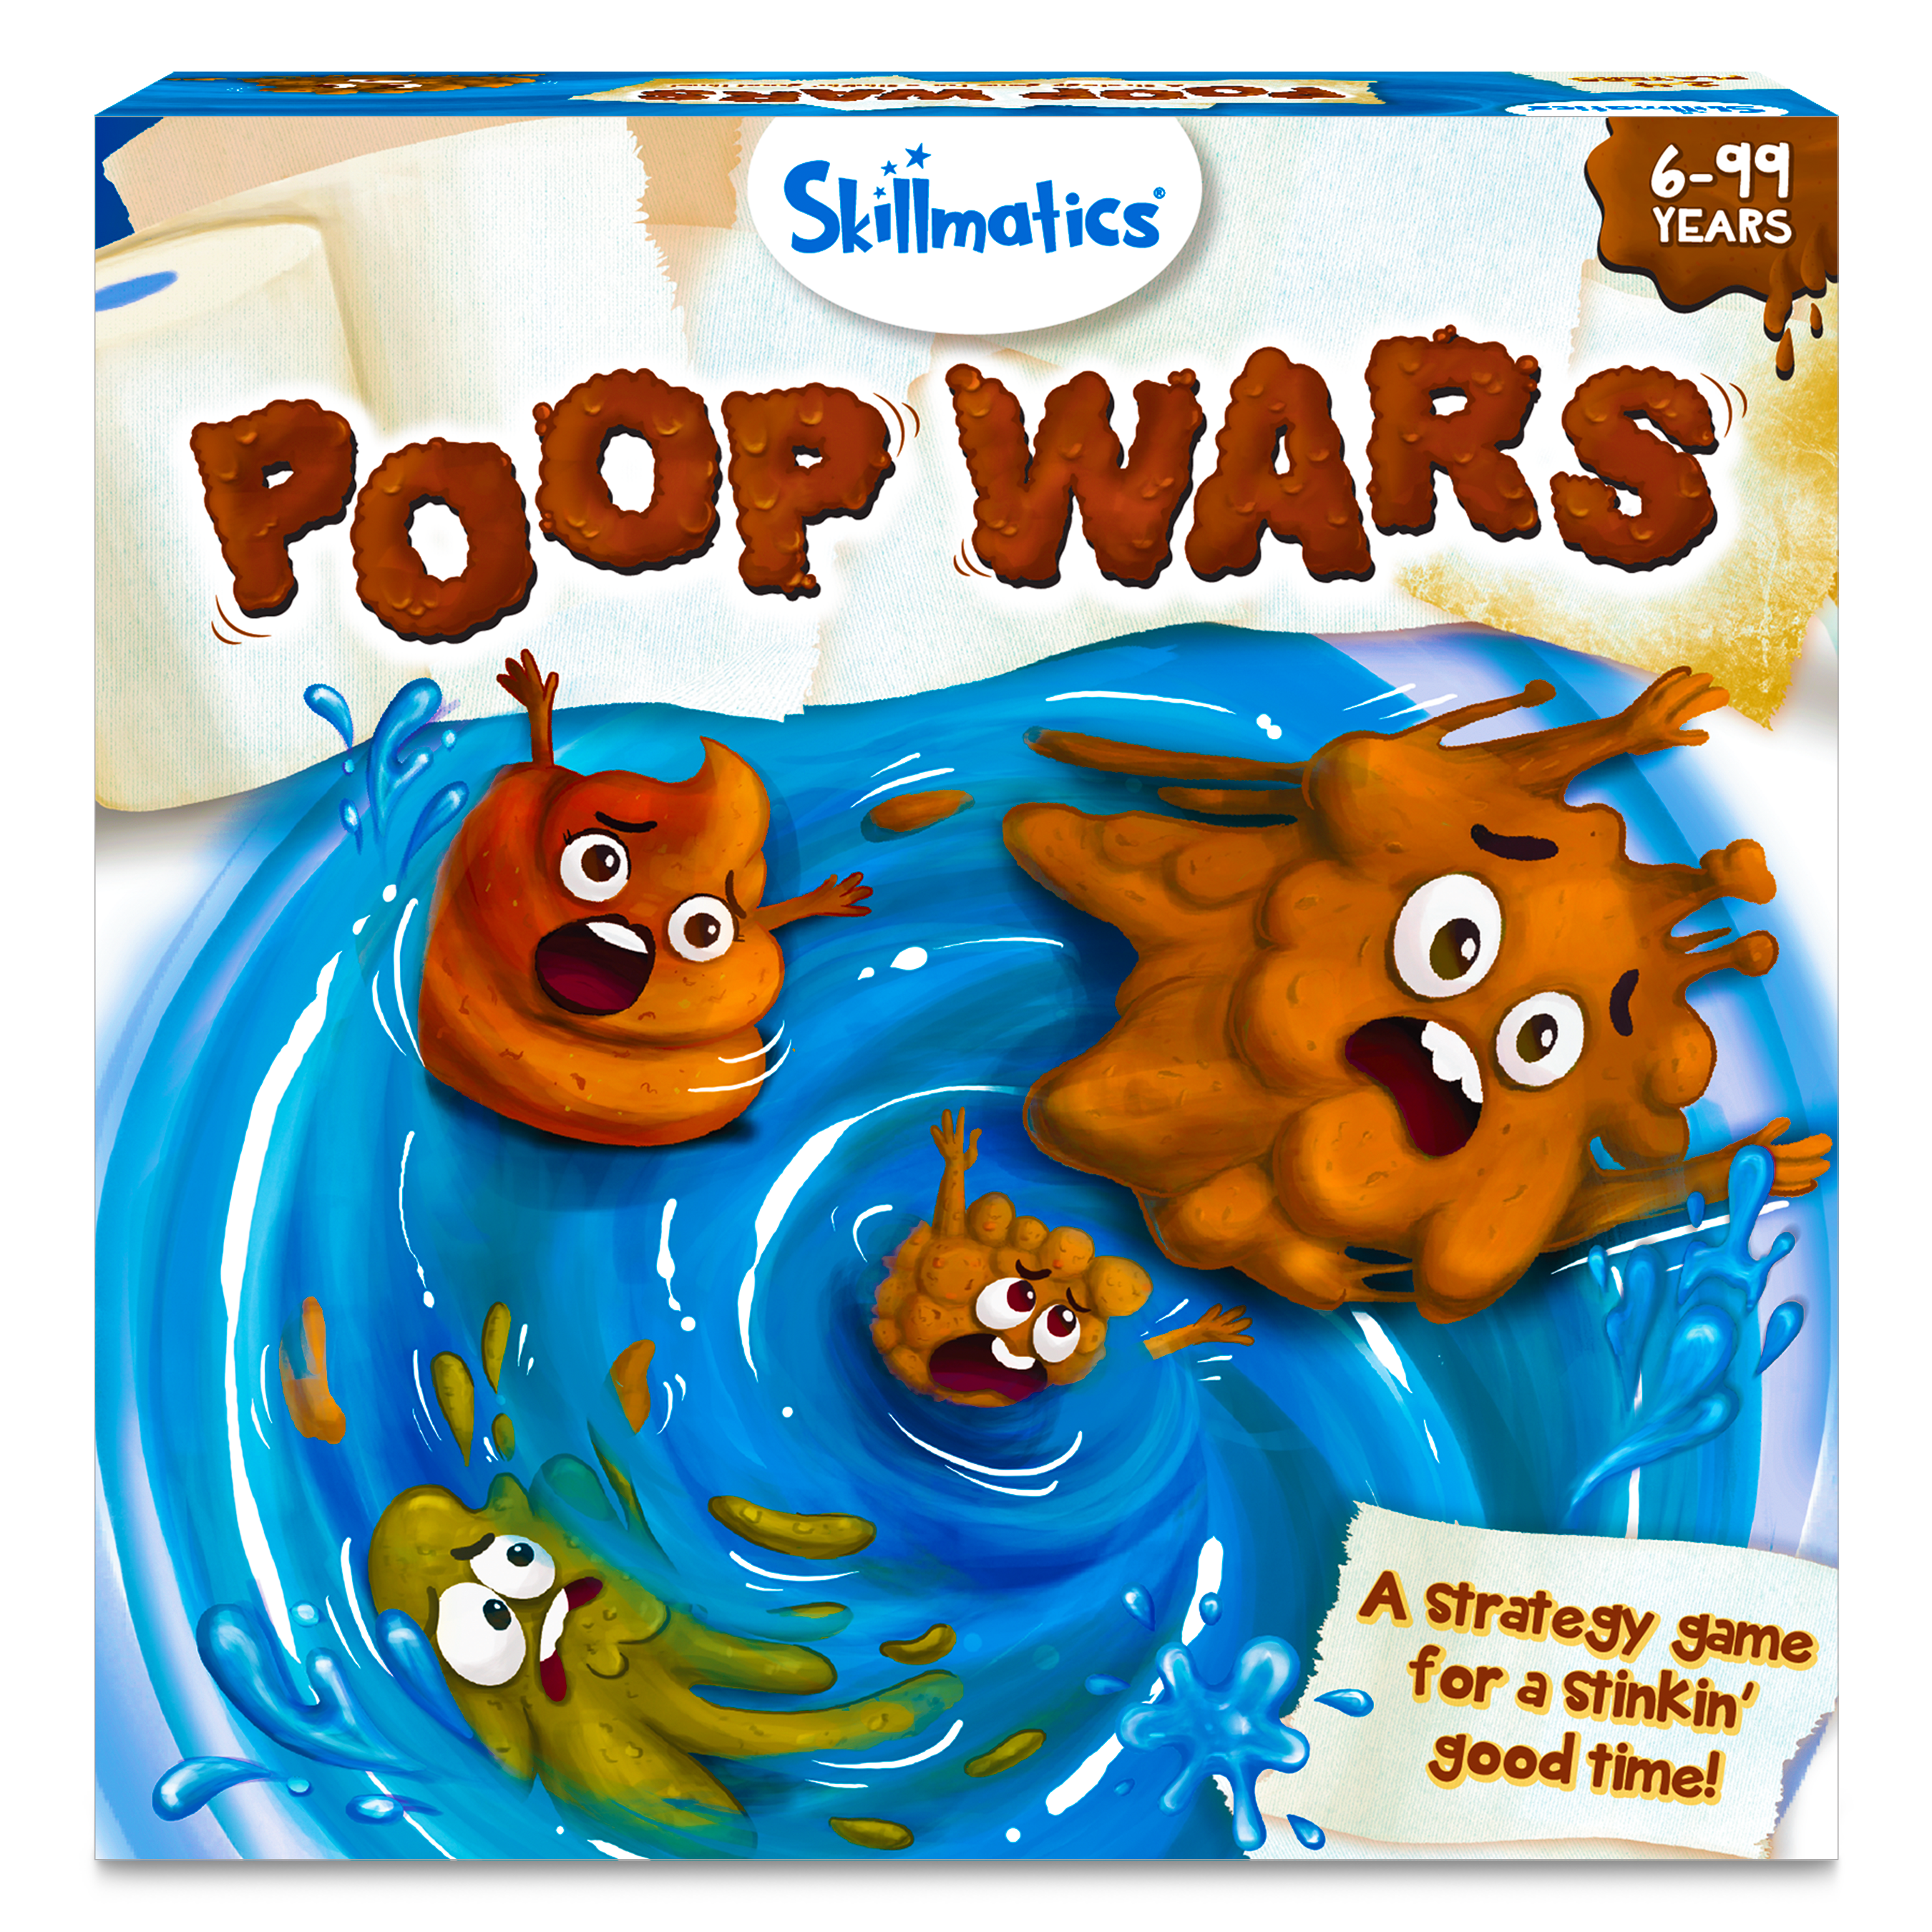 Skillmatics Card Game - Poop Wars, Fun & Fast-Paced Game Of Strategy, Party Game For Kids & Family, Gift For Girls & Boys Ages 6 & Up